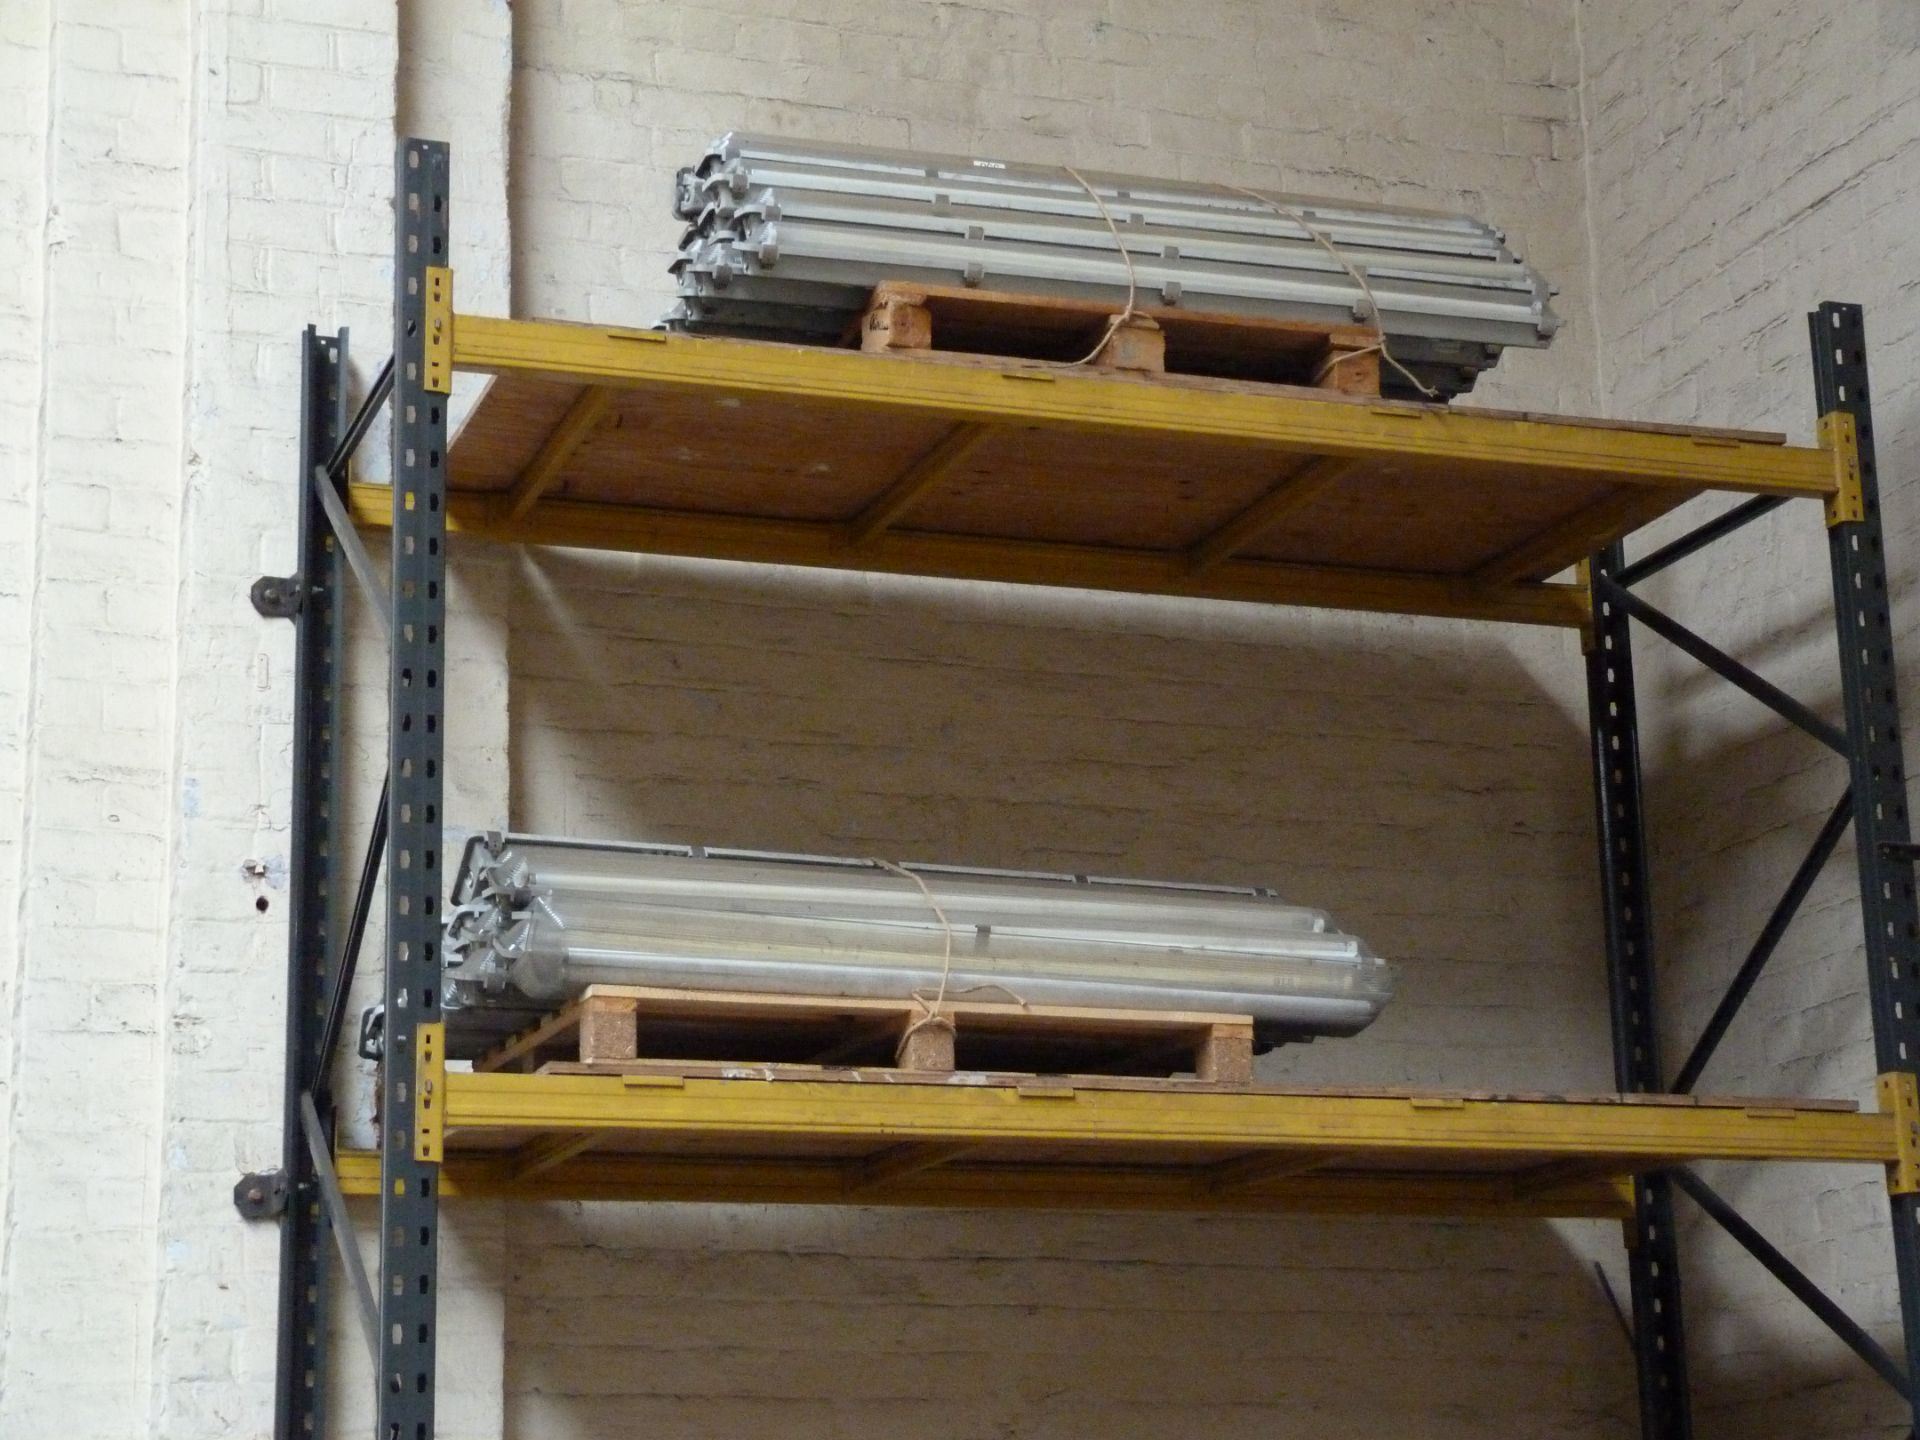 Four pallets of used light fittings